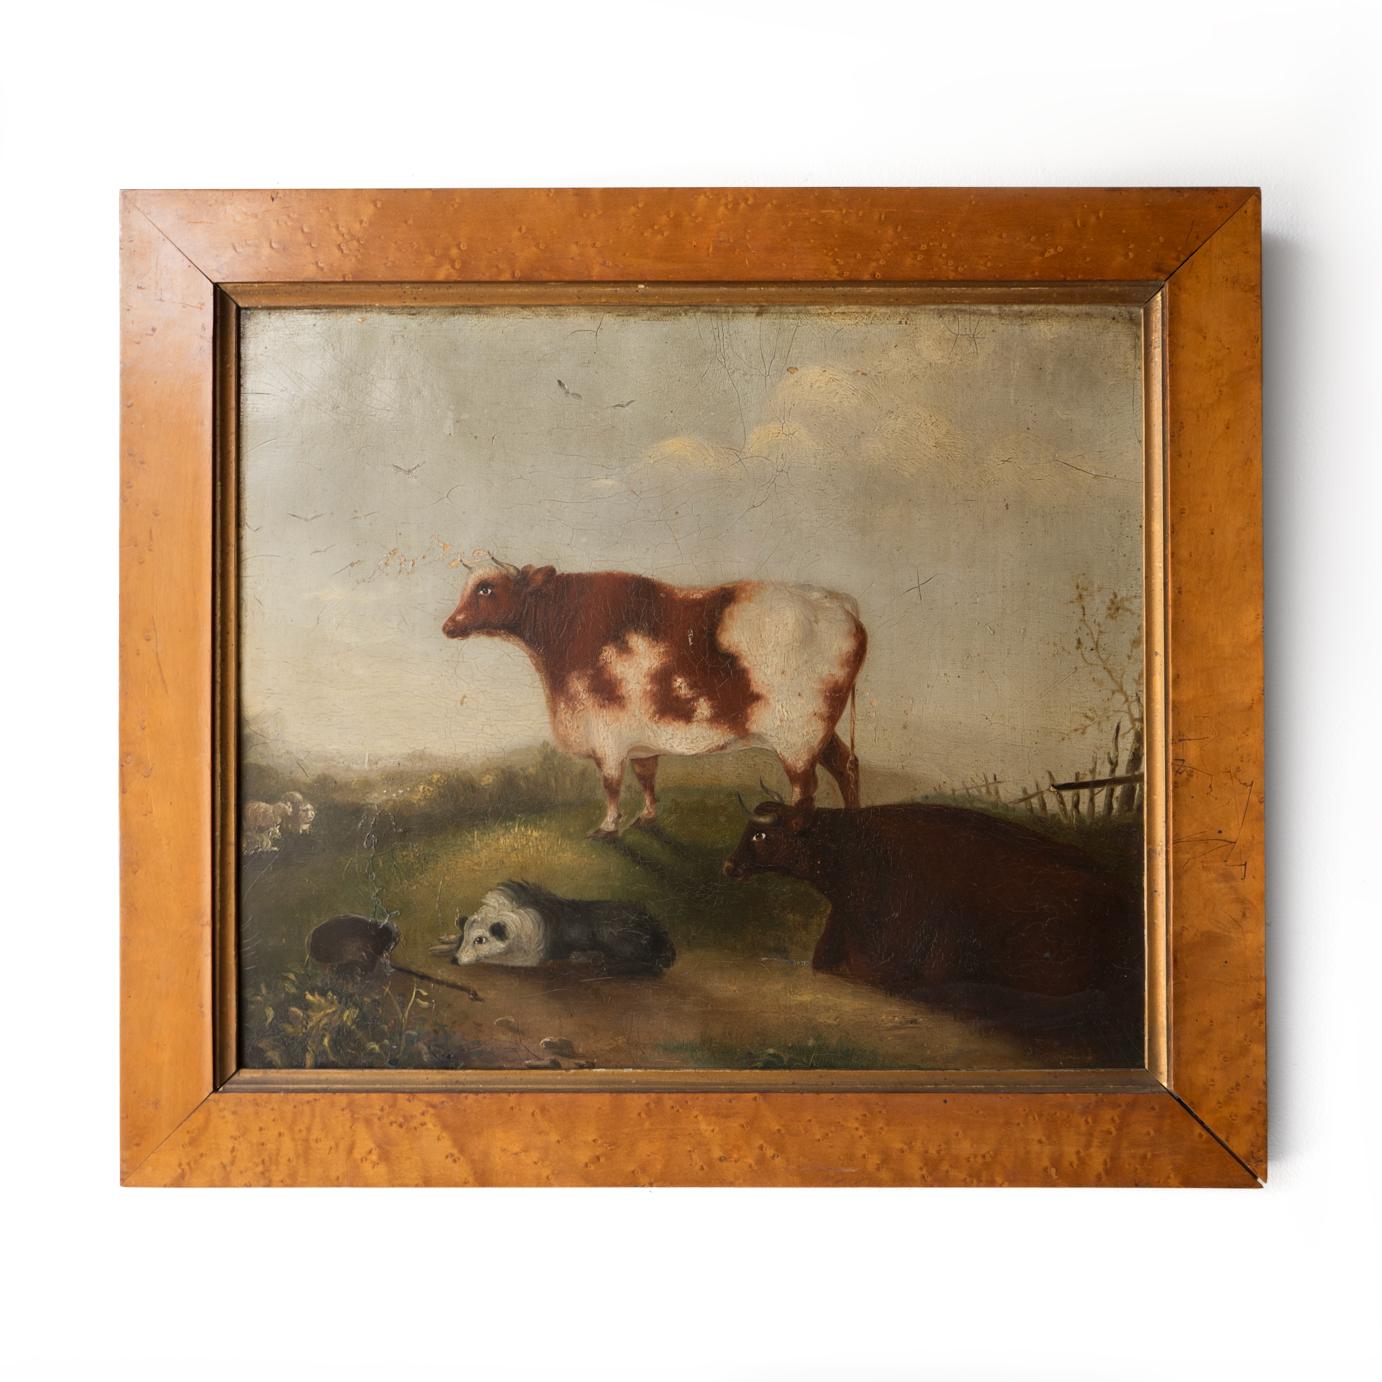 ANTIQUE NAIVE RURAL SCENE

One of the most charming and thoroughly sweet depictions of farm animals I have seen. There is a lovely glint in their eyes! Two cattle, possibly shorthorn one seated and one standing, a fluffy seated sheepdog next to a